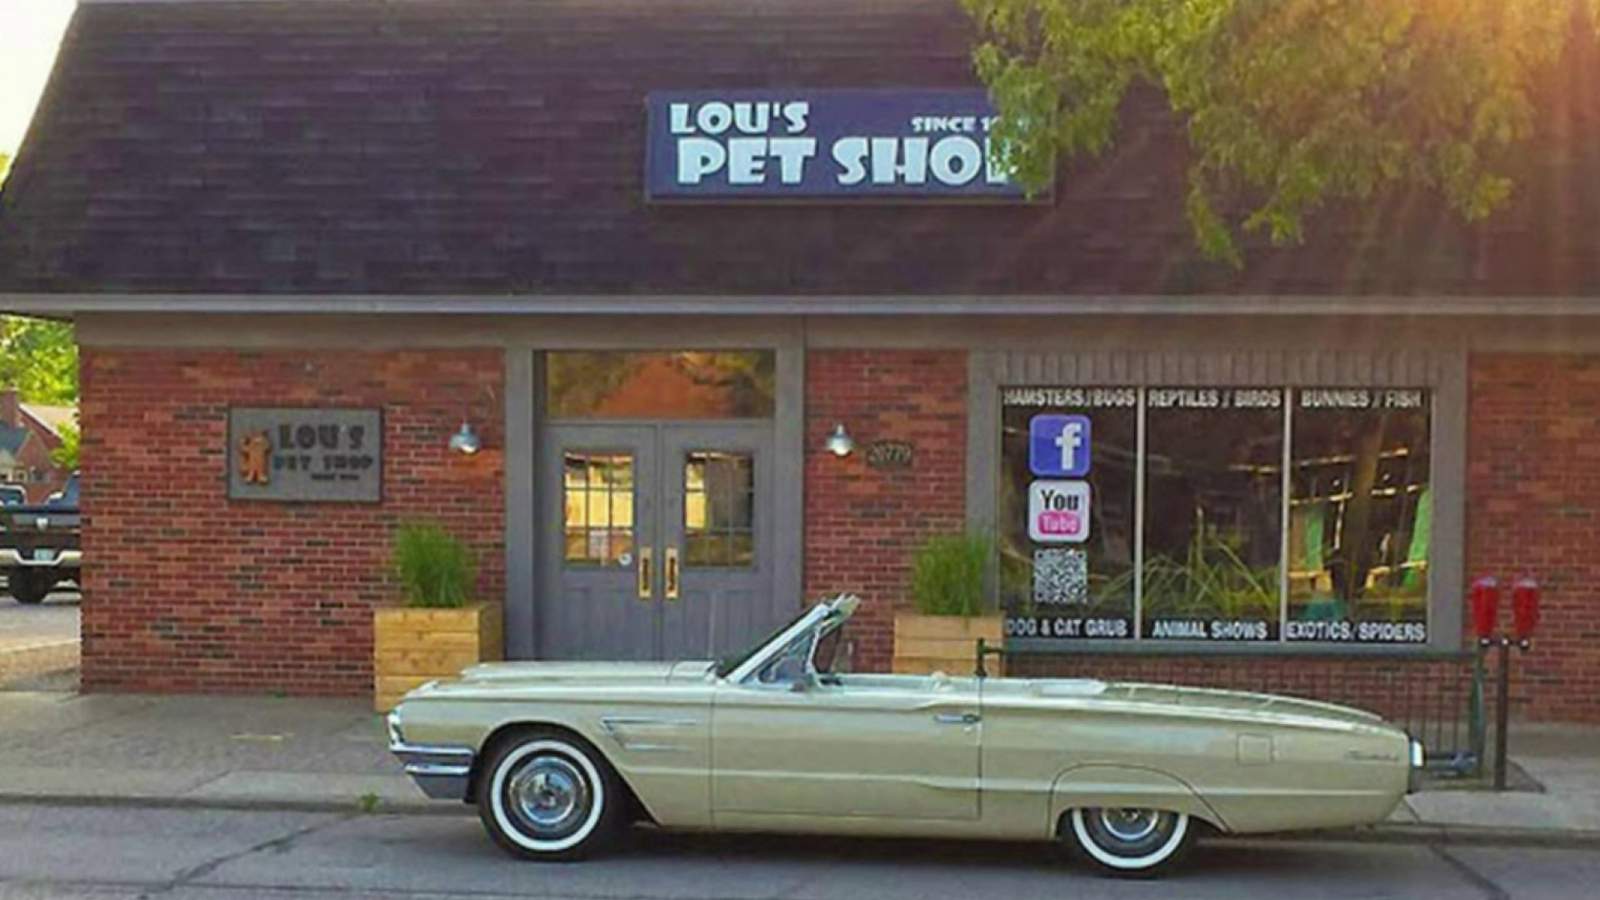 Have you ever seen a pet store like this?